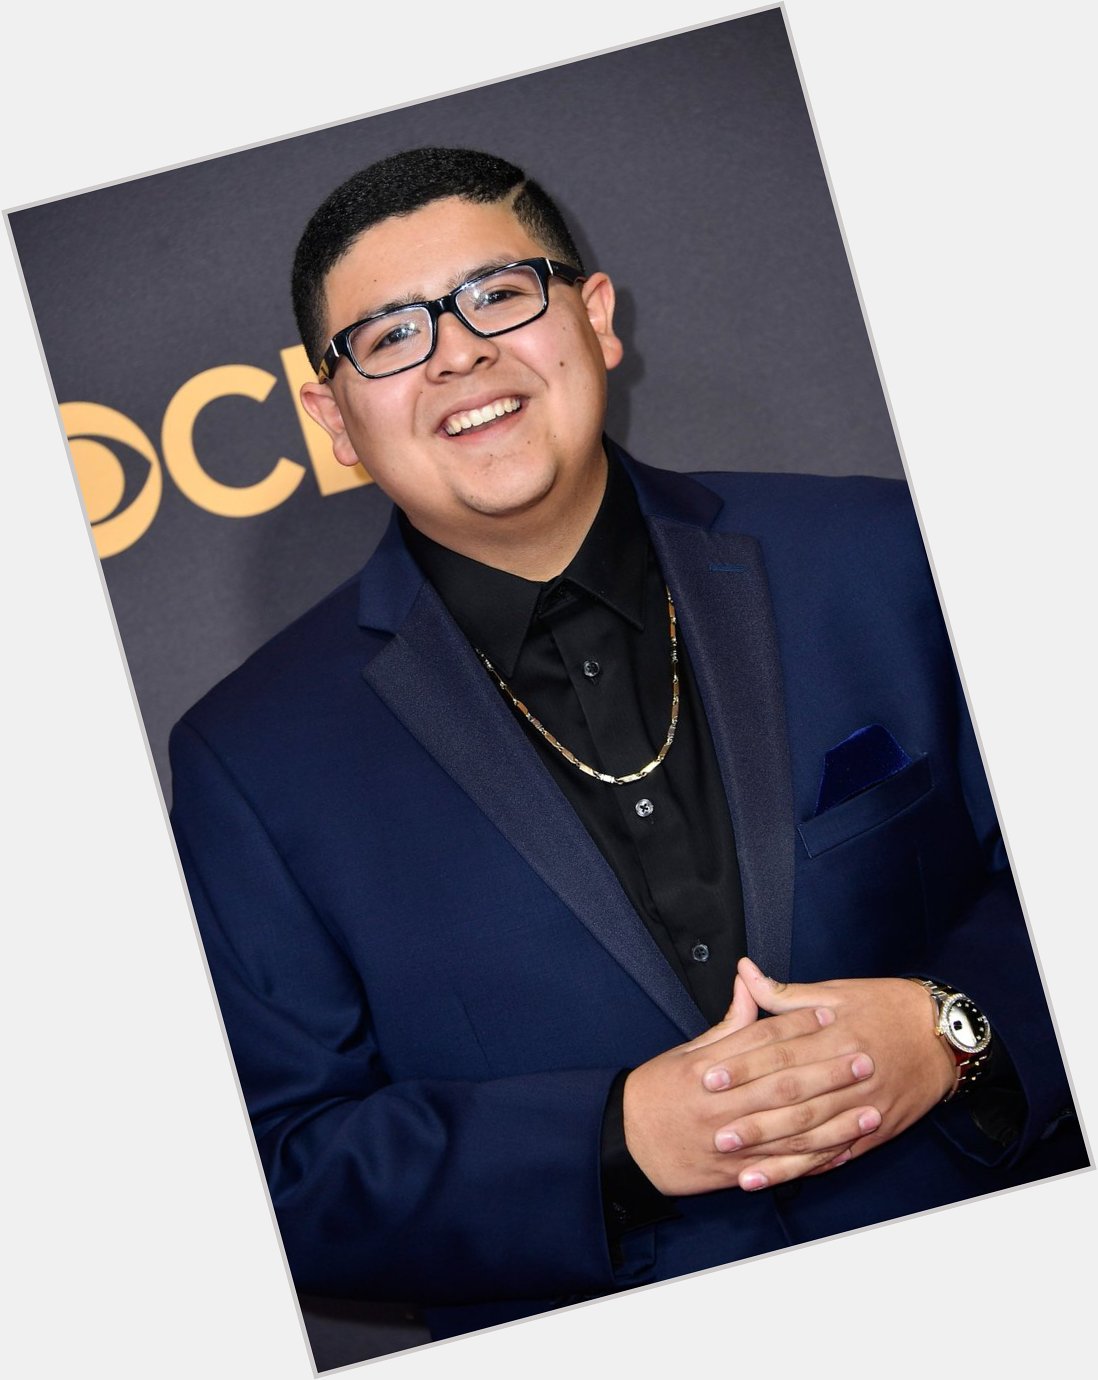 Happy 24th birthday to (Rico Rodriguez)! The actor who played Manny Delgado from Modern Family. 